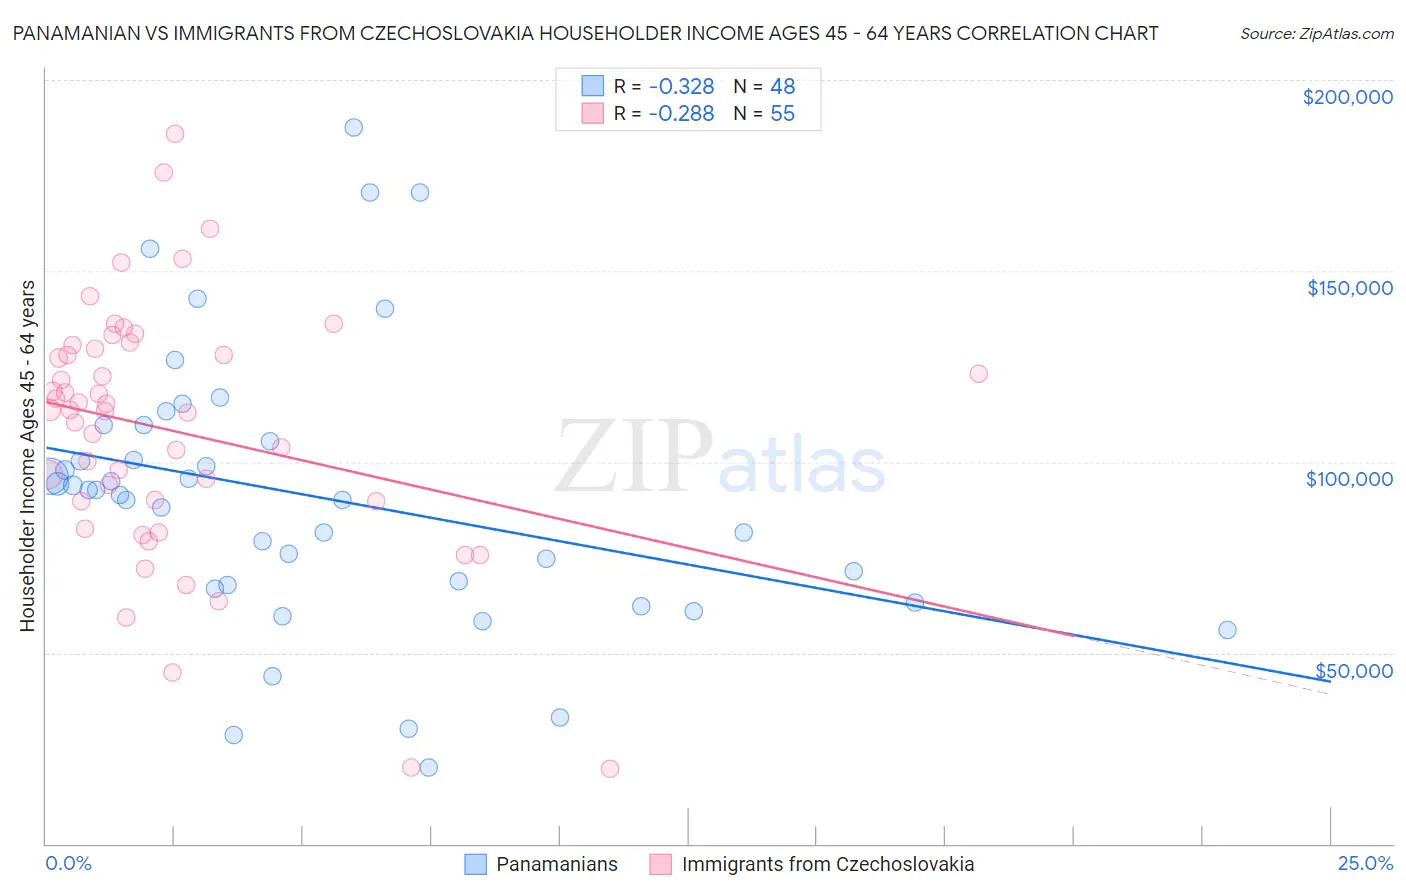 Panamanian vs Immigrants from Czechoslovakia Householder Income Ages 45 - 64 years